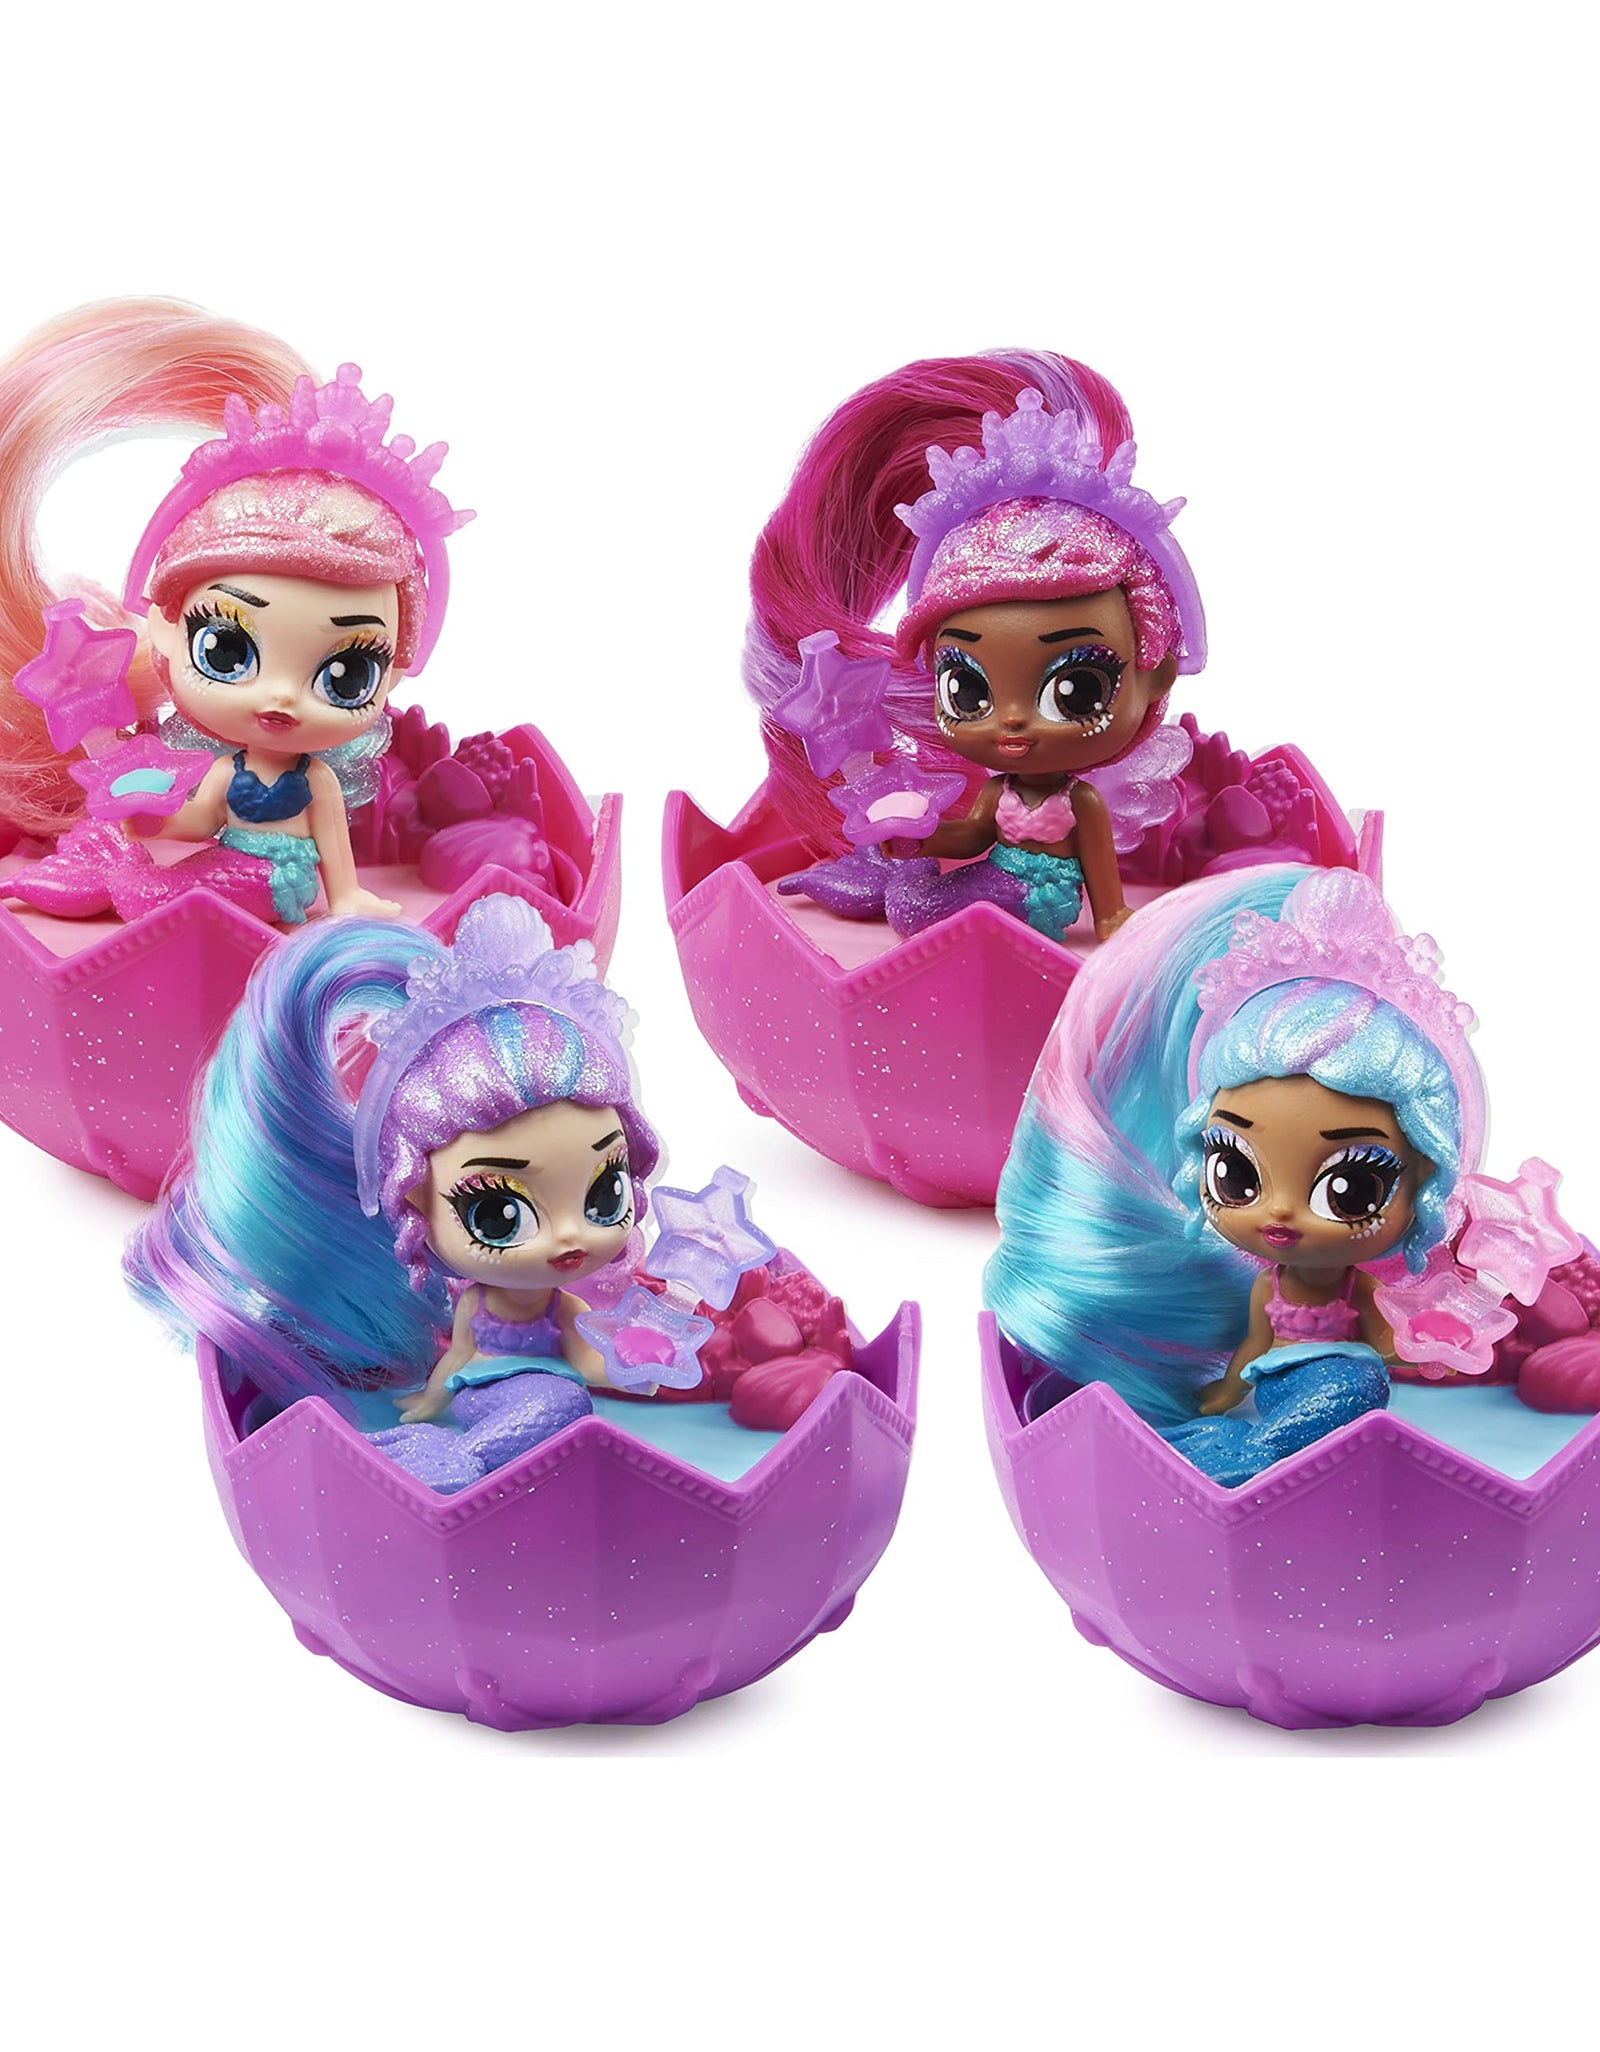 Hatchimals Pixies, Mermaids 2-Pack Collectible Dolls & Accessories (Styles May Vary), Girl Toys for Ages 5 and up